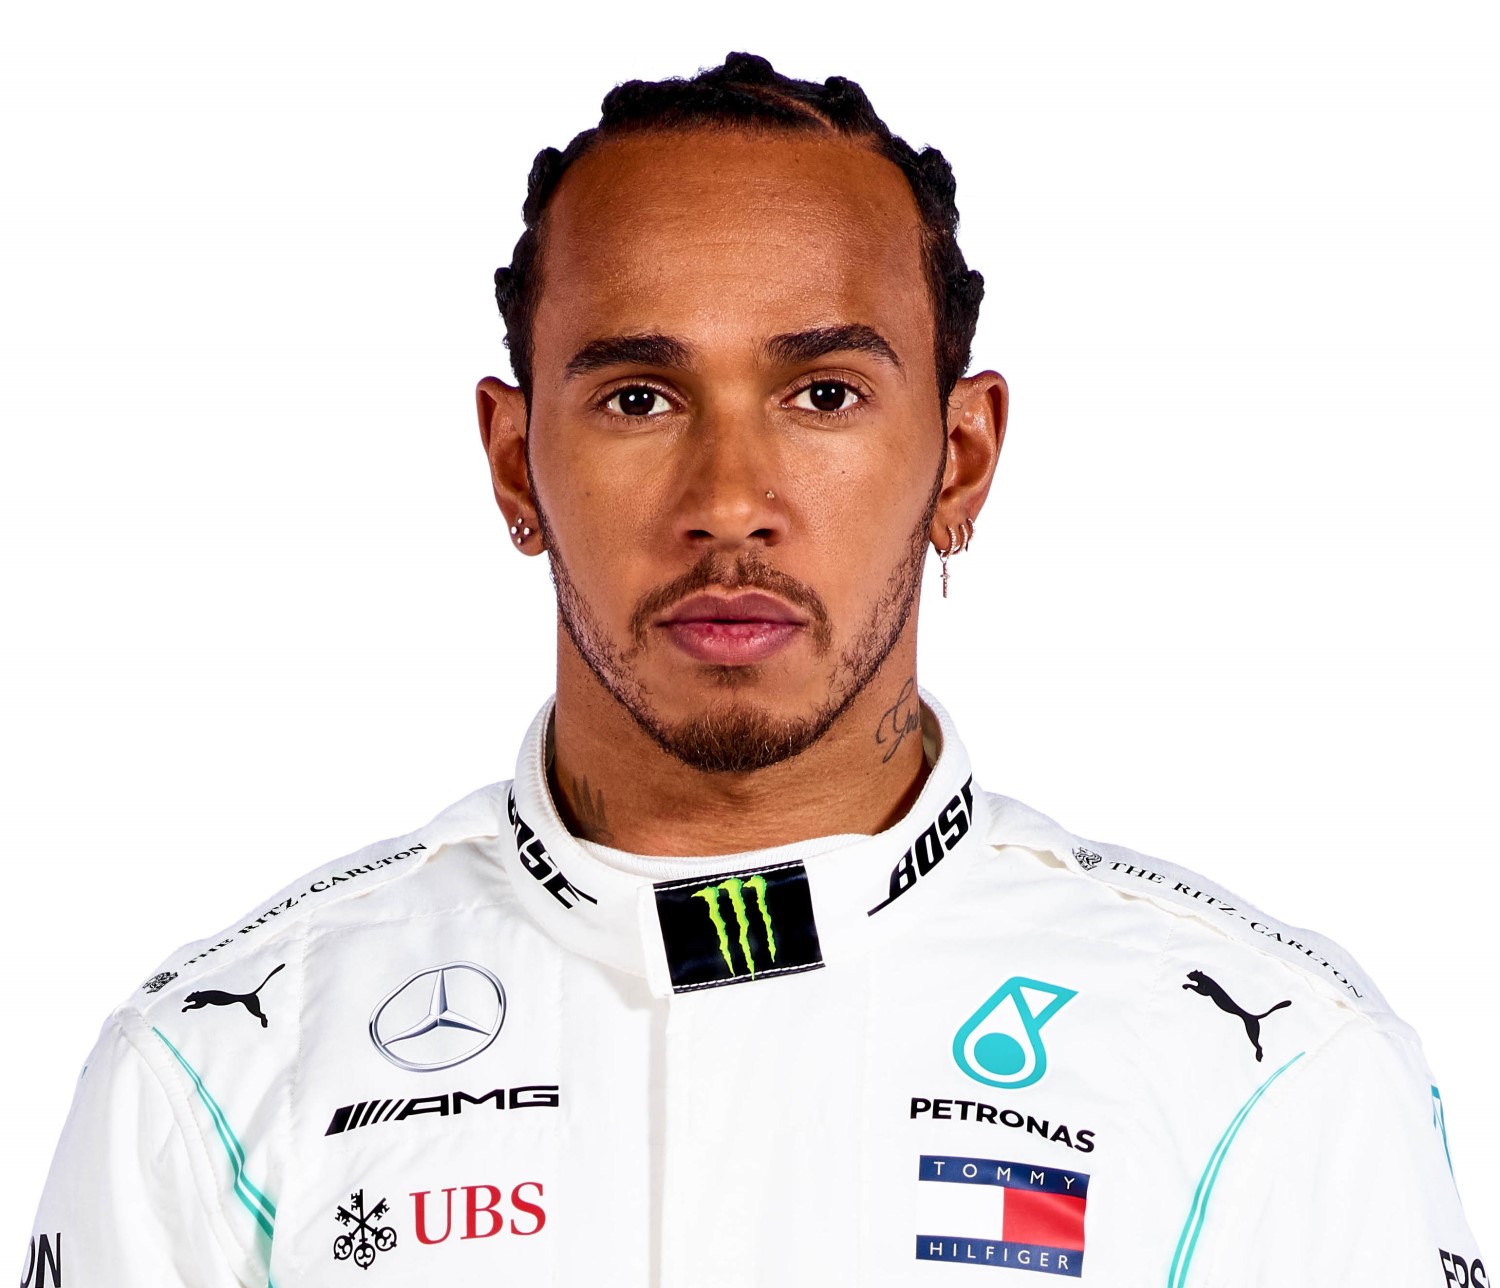 Lewis Hamilton will race on as long as Mercedes has the superior car and he cannot lose